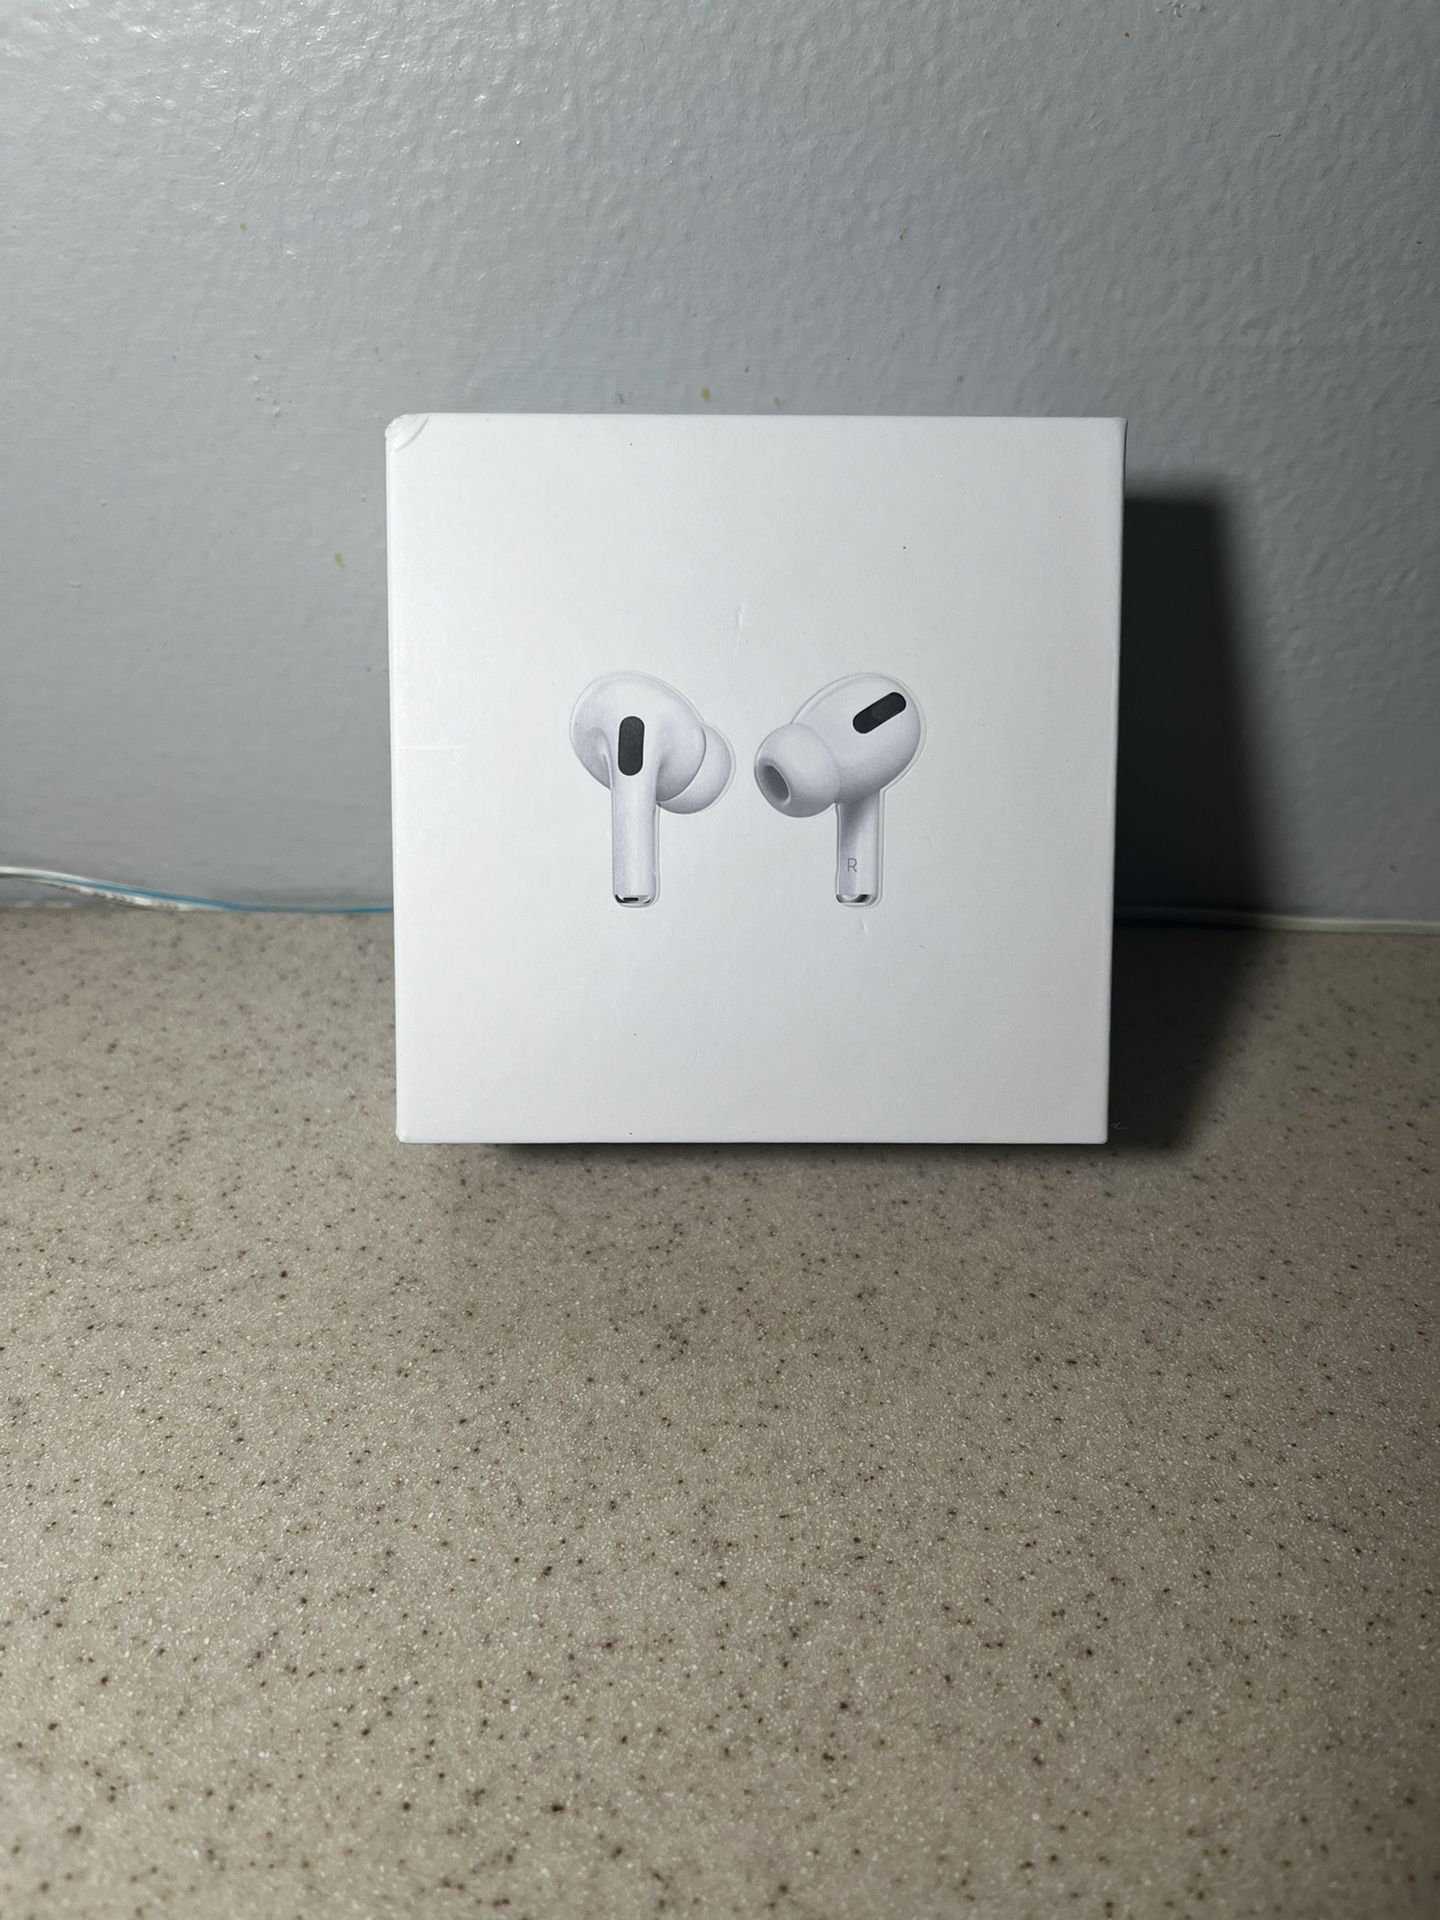 *BEST OFFER* AirPods Pro